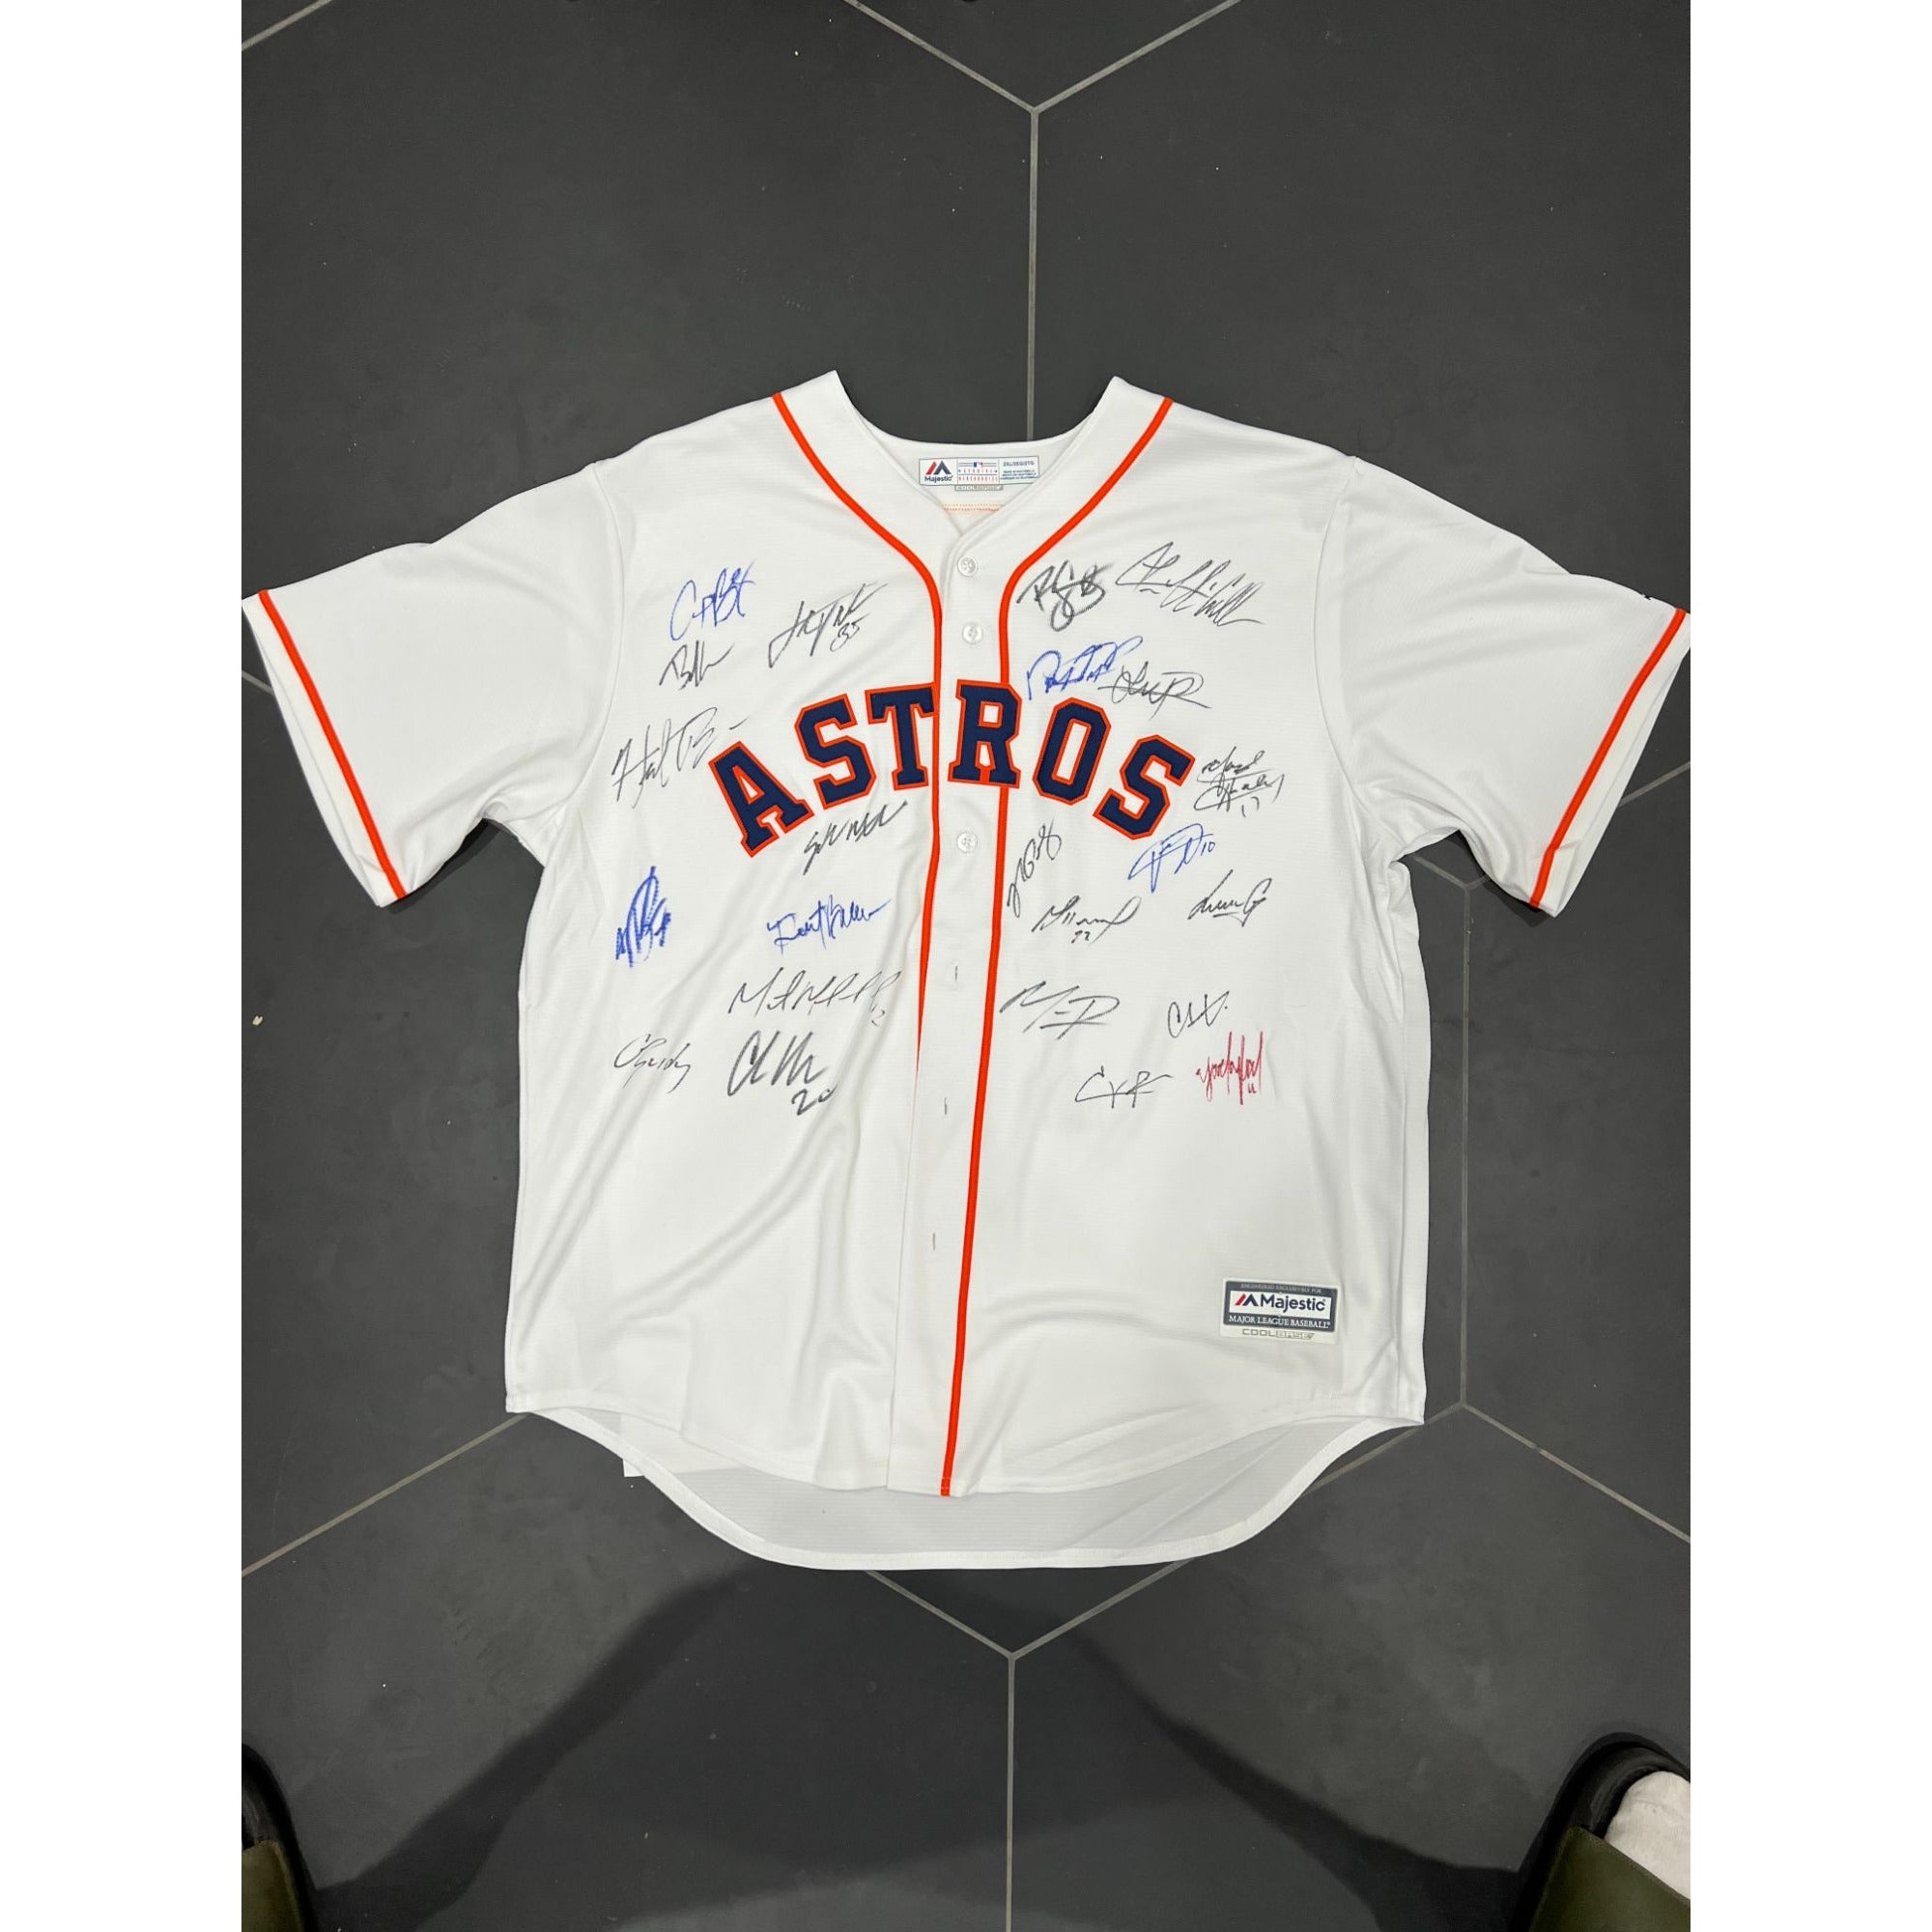 Alex Bregman Autographed and Framed Houston Astros Jersey